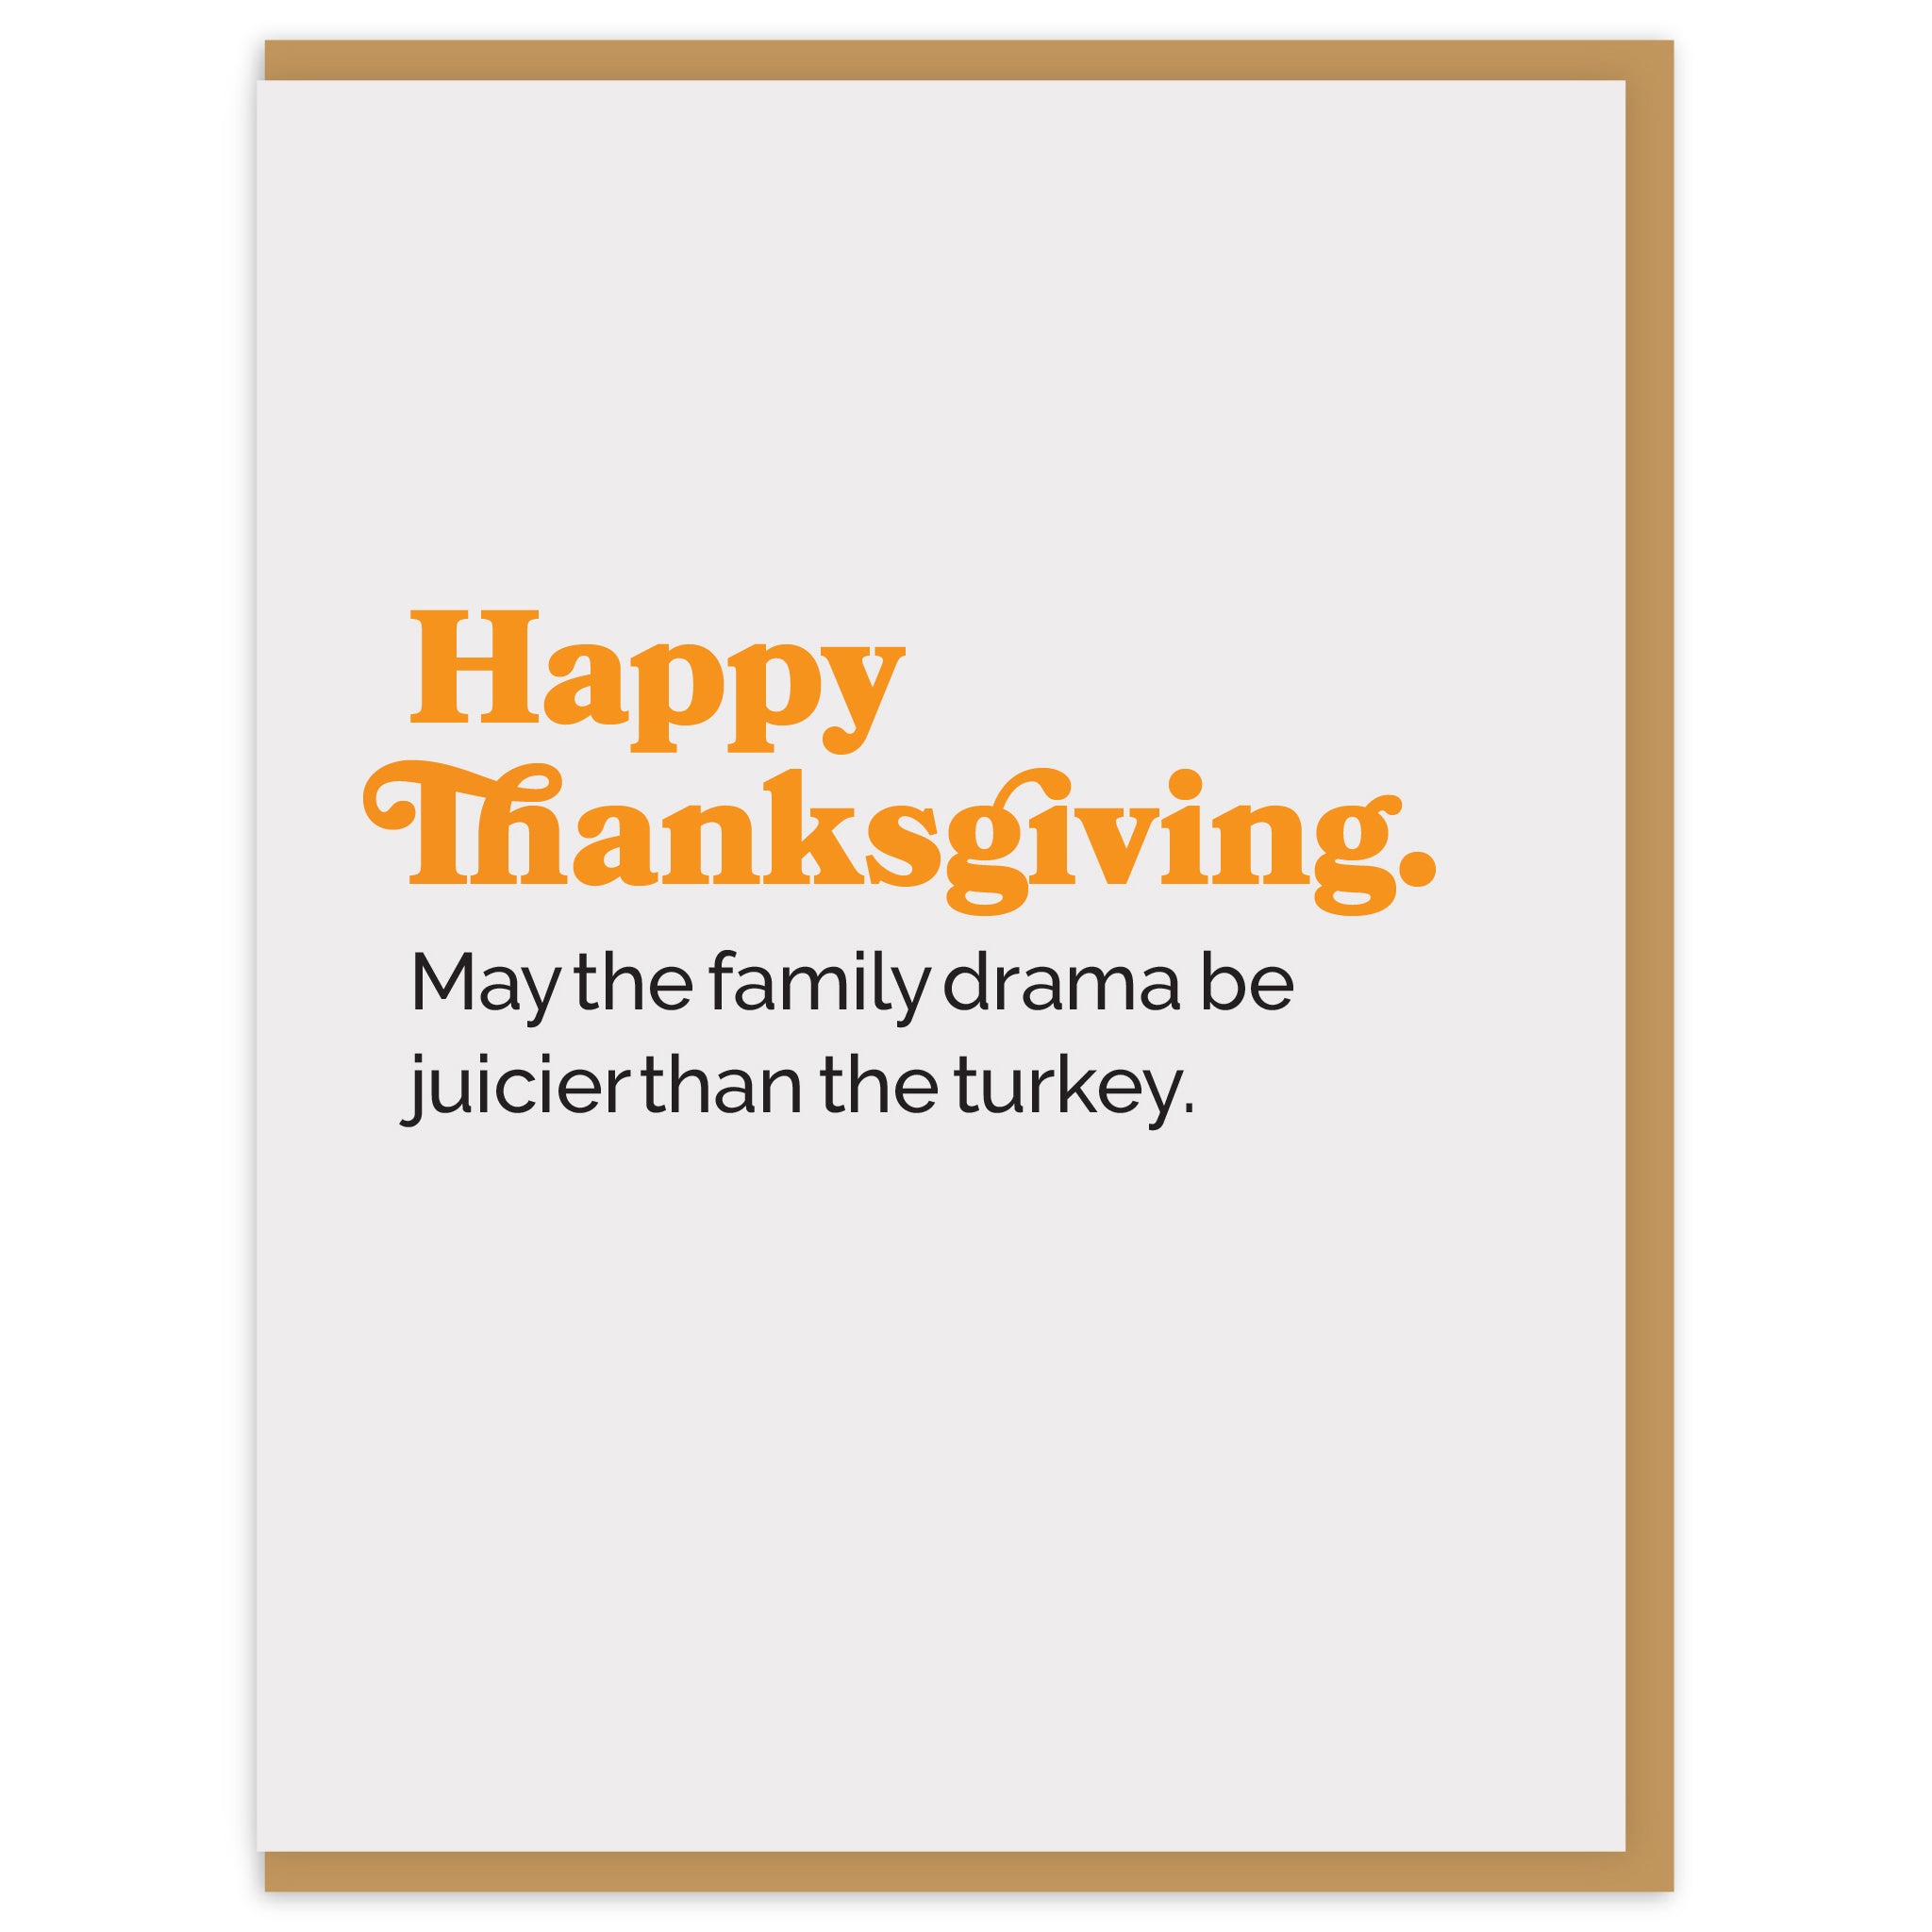 Happy Thanksgiving. May the family drama be juicier than the turkey. -  Spacepig Press